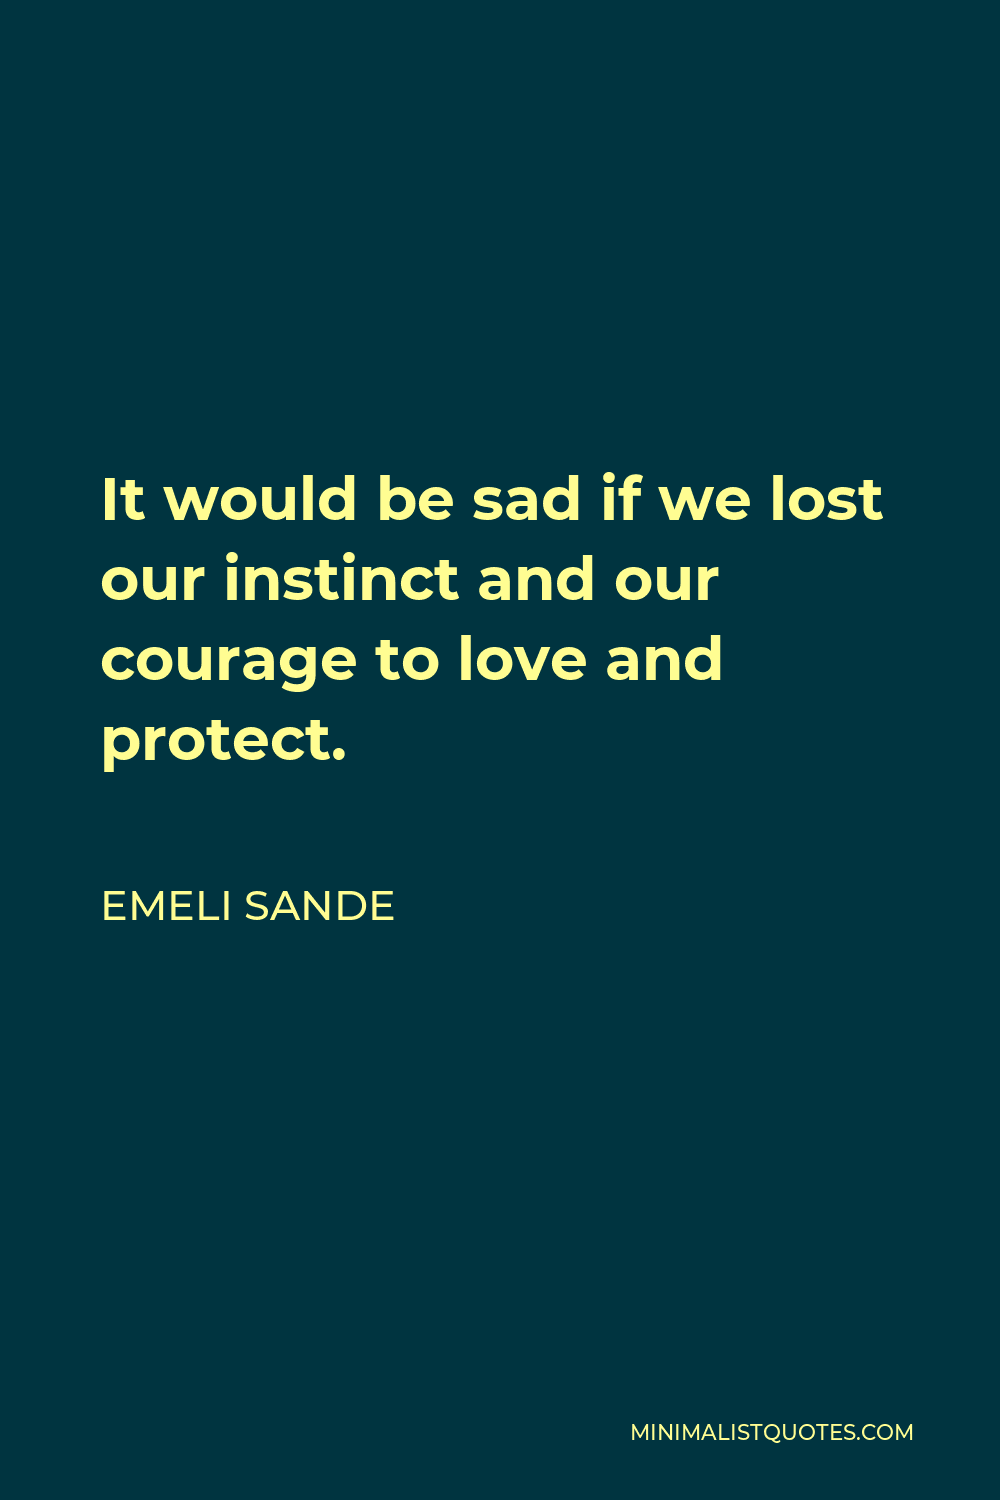 Emeli Sande Quote - It would be sad if we lost our instinct and our courage to love and protect.